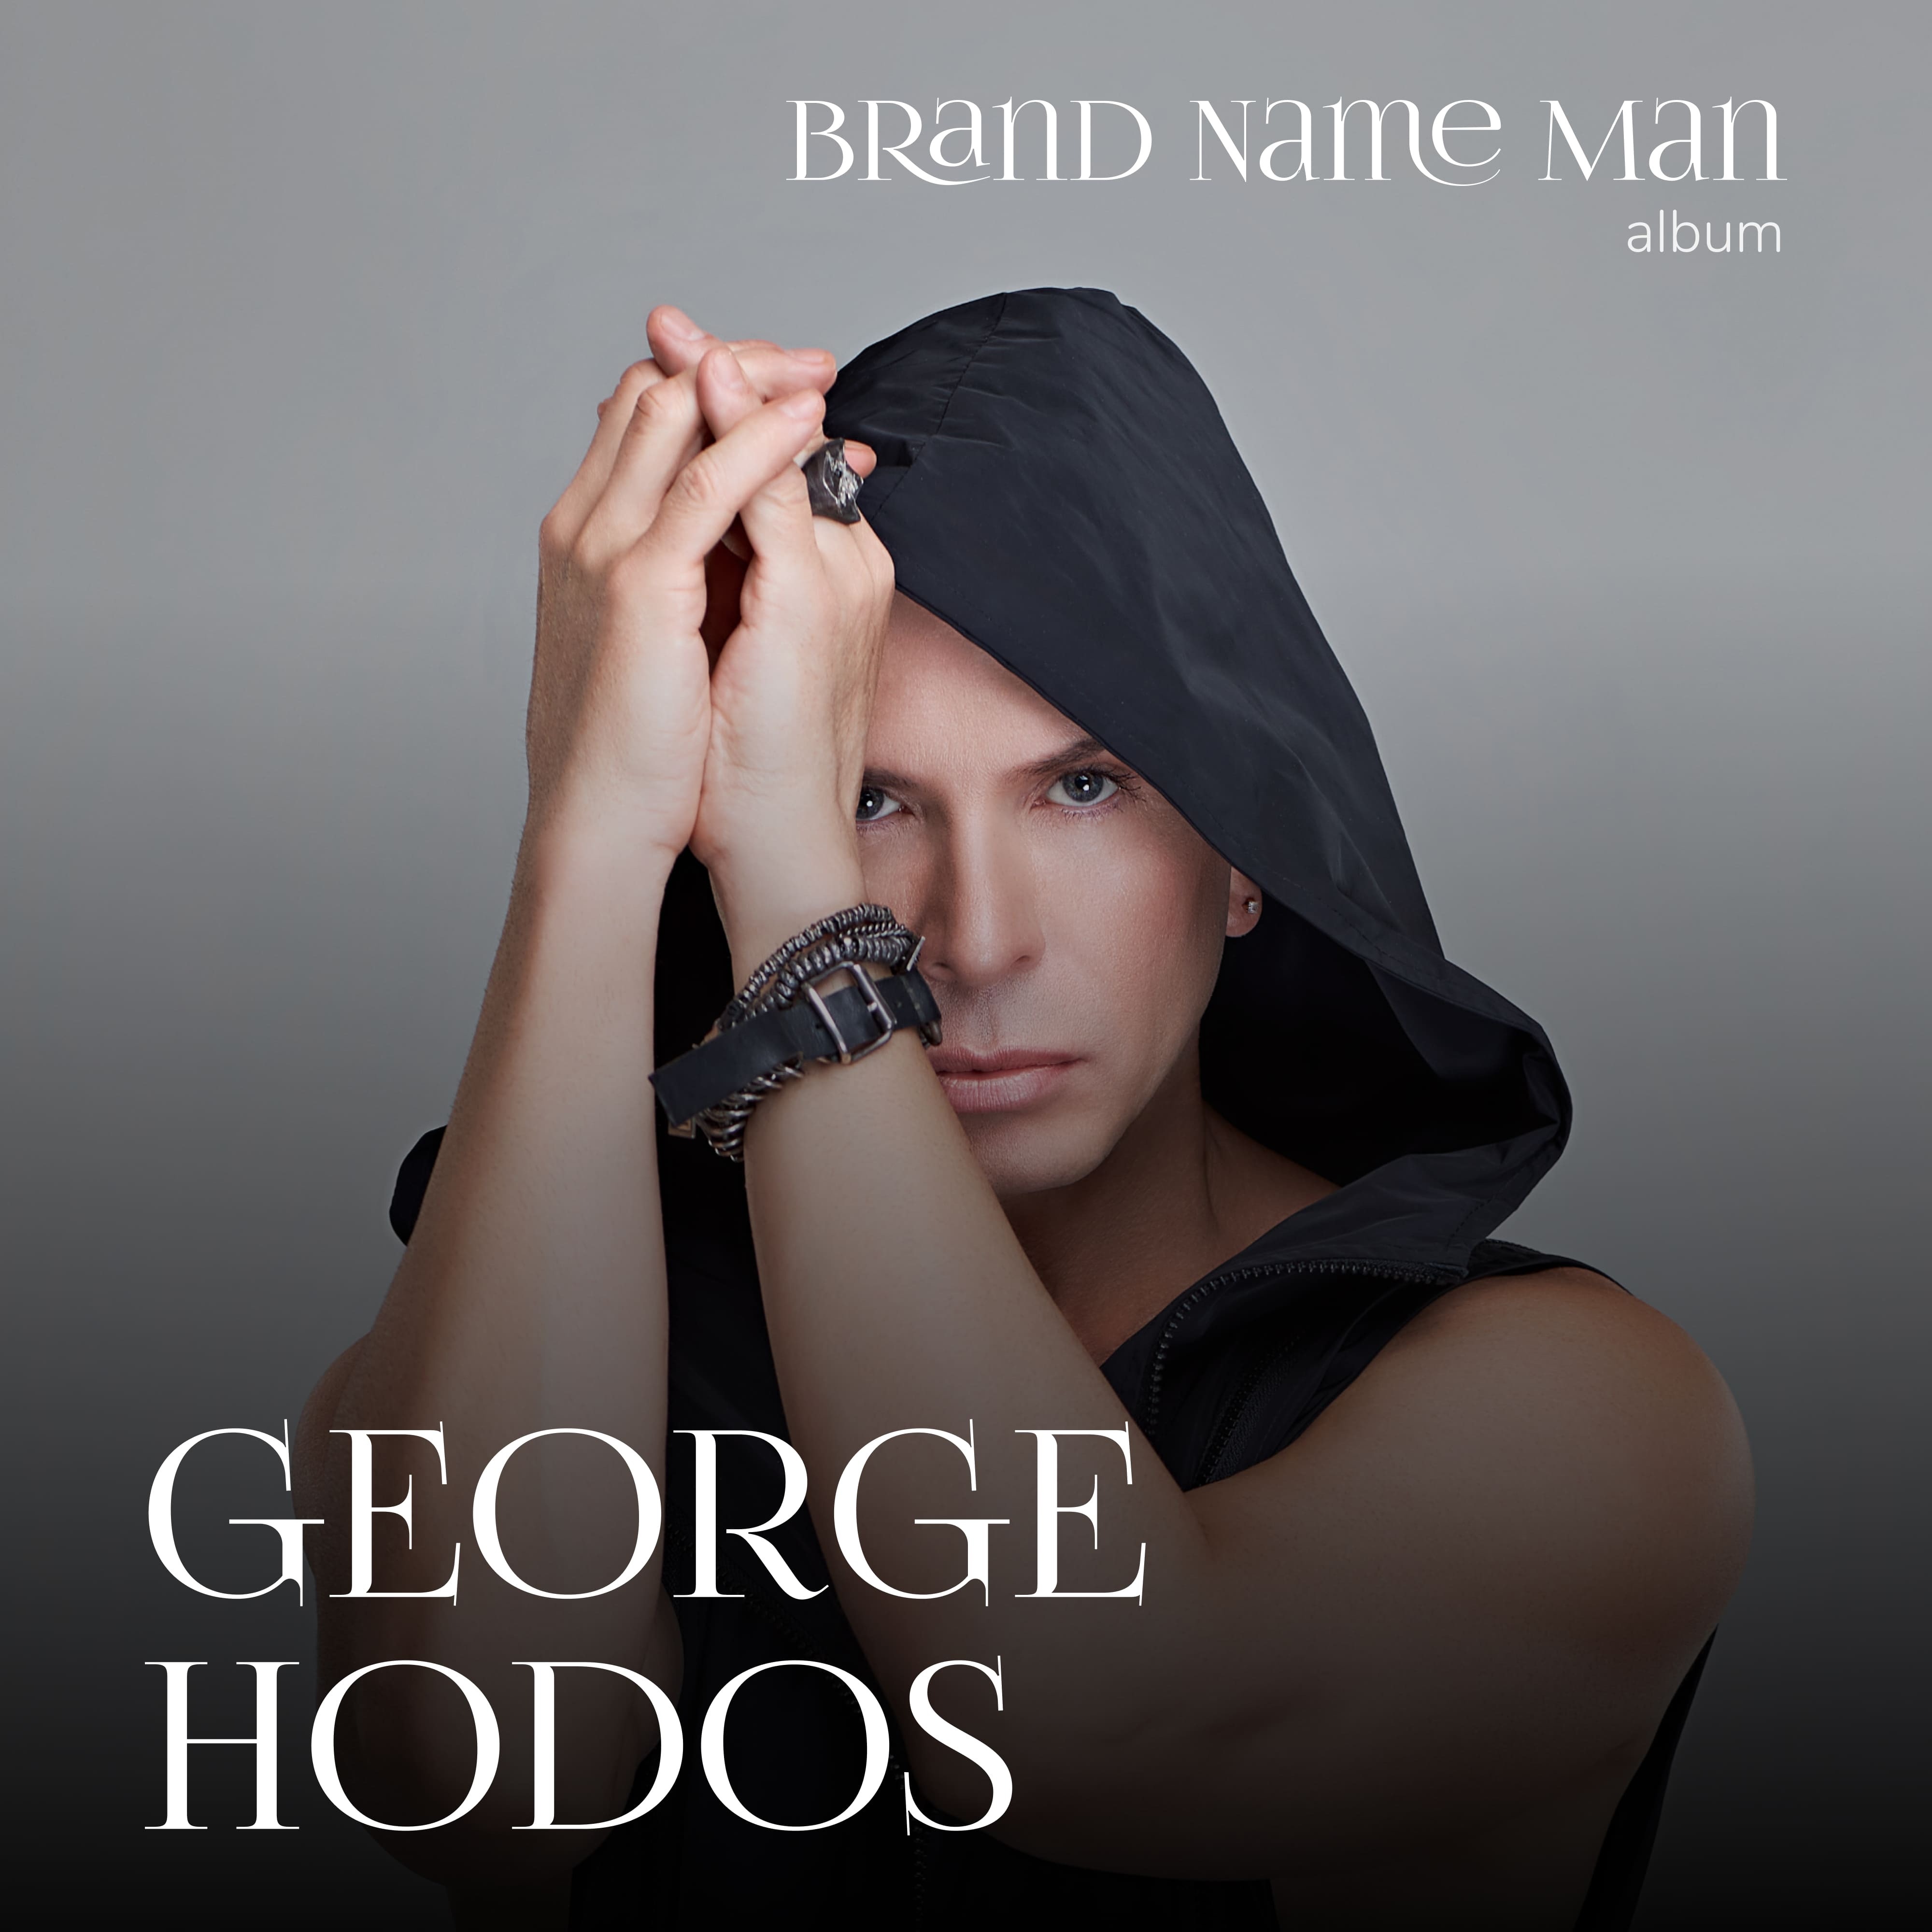 New Album of Billboard charting artist George Hodos Brand Name Man brought back the excellence of "Divo’s time."